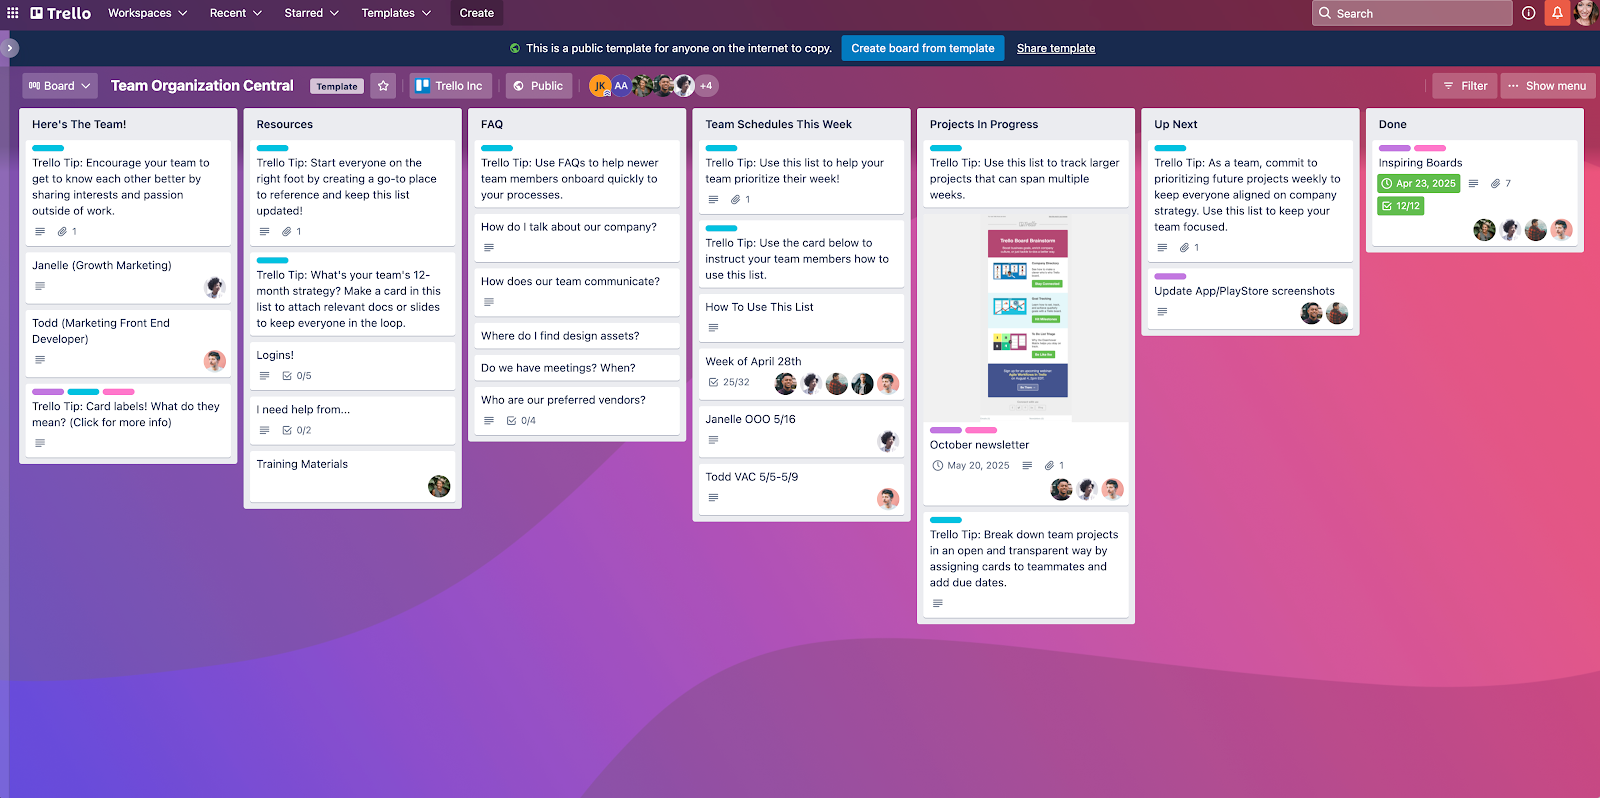 screenshot of a Trello board used as a knowledge base for teams